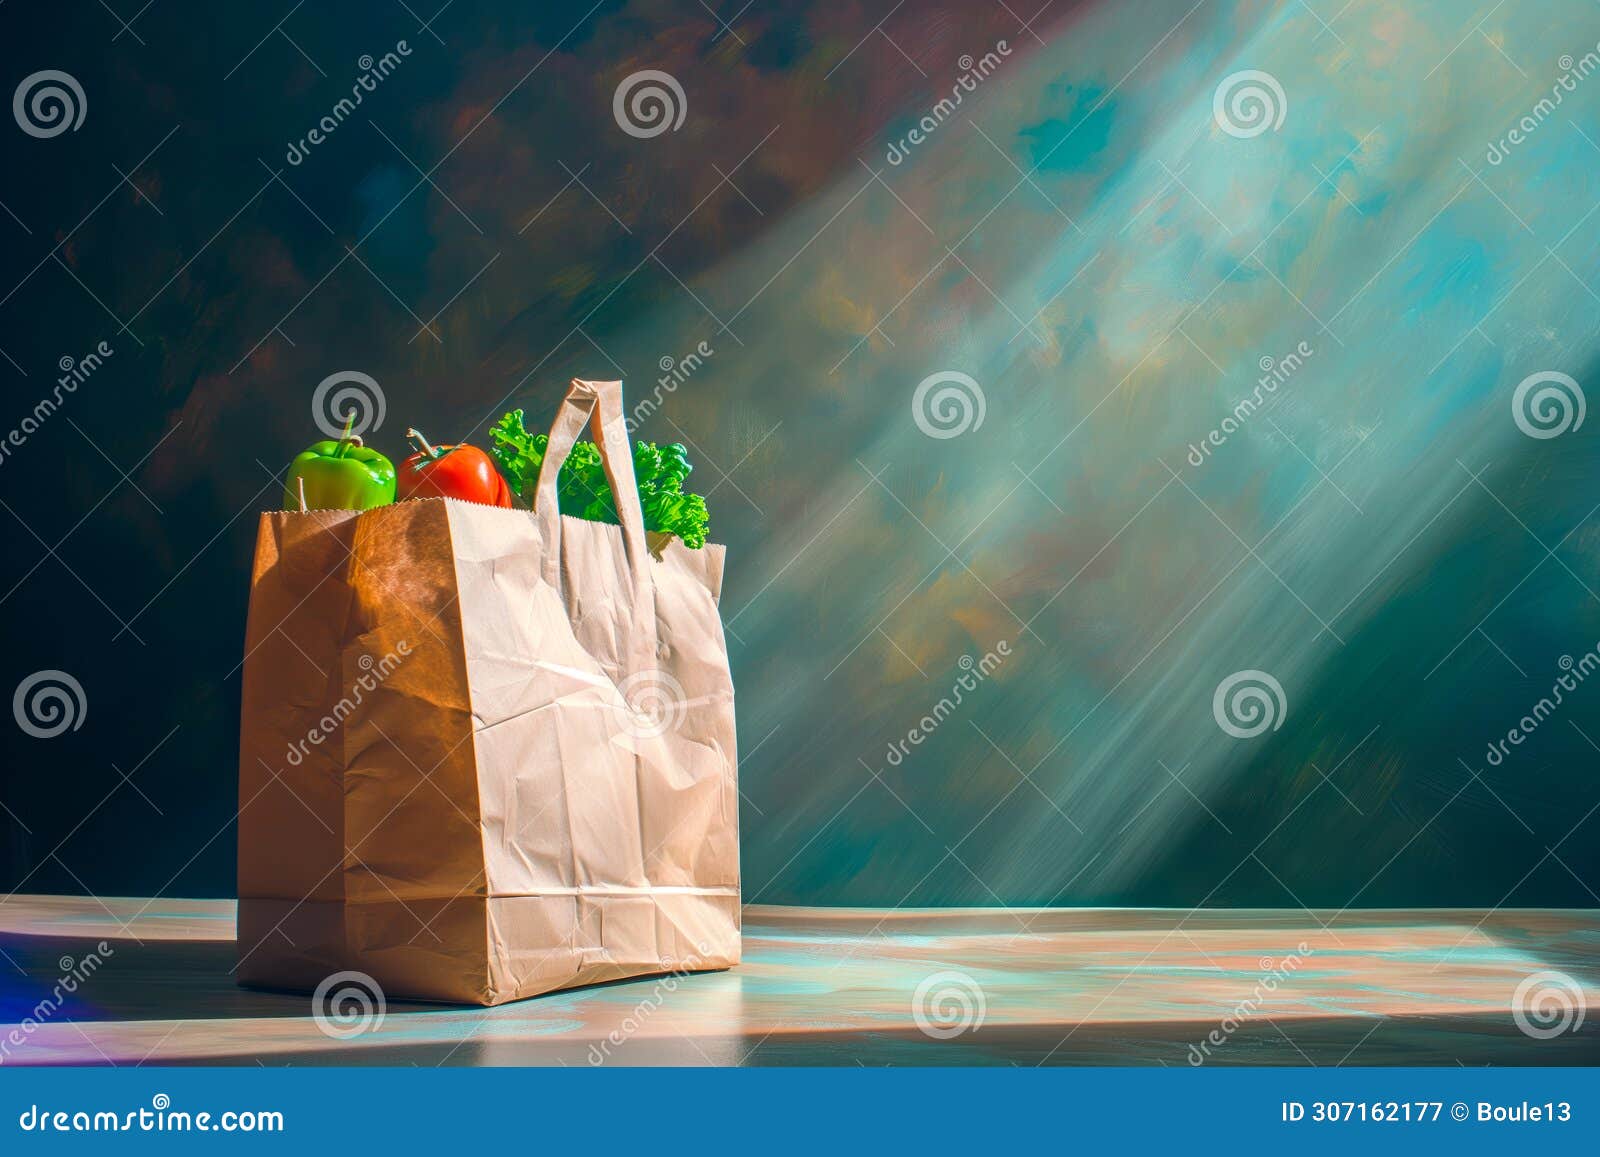 craft brown shopping paper bag on blue background with soft sfumato lightening.